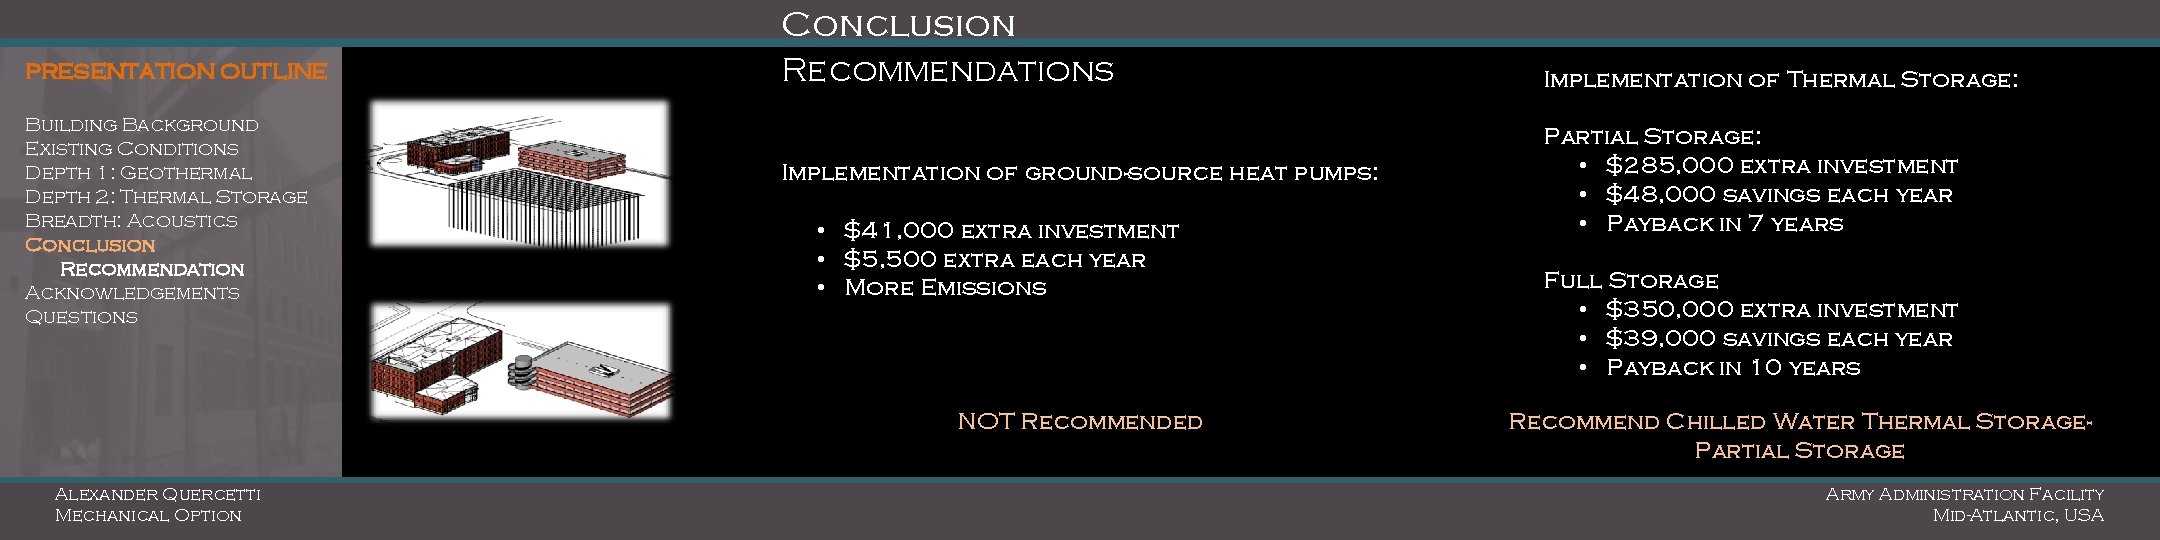 Conclusion PRESENTATION OUTLINE Building Background Existing Conditions Depth 1: Geothermal Depth 2: Thermal Storage